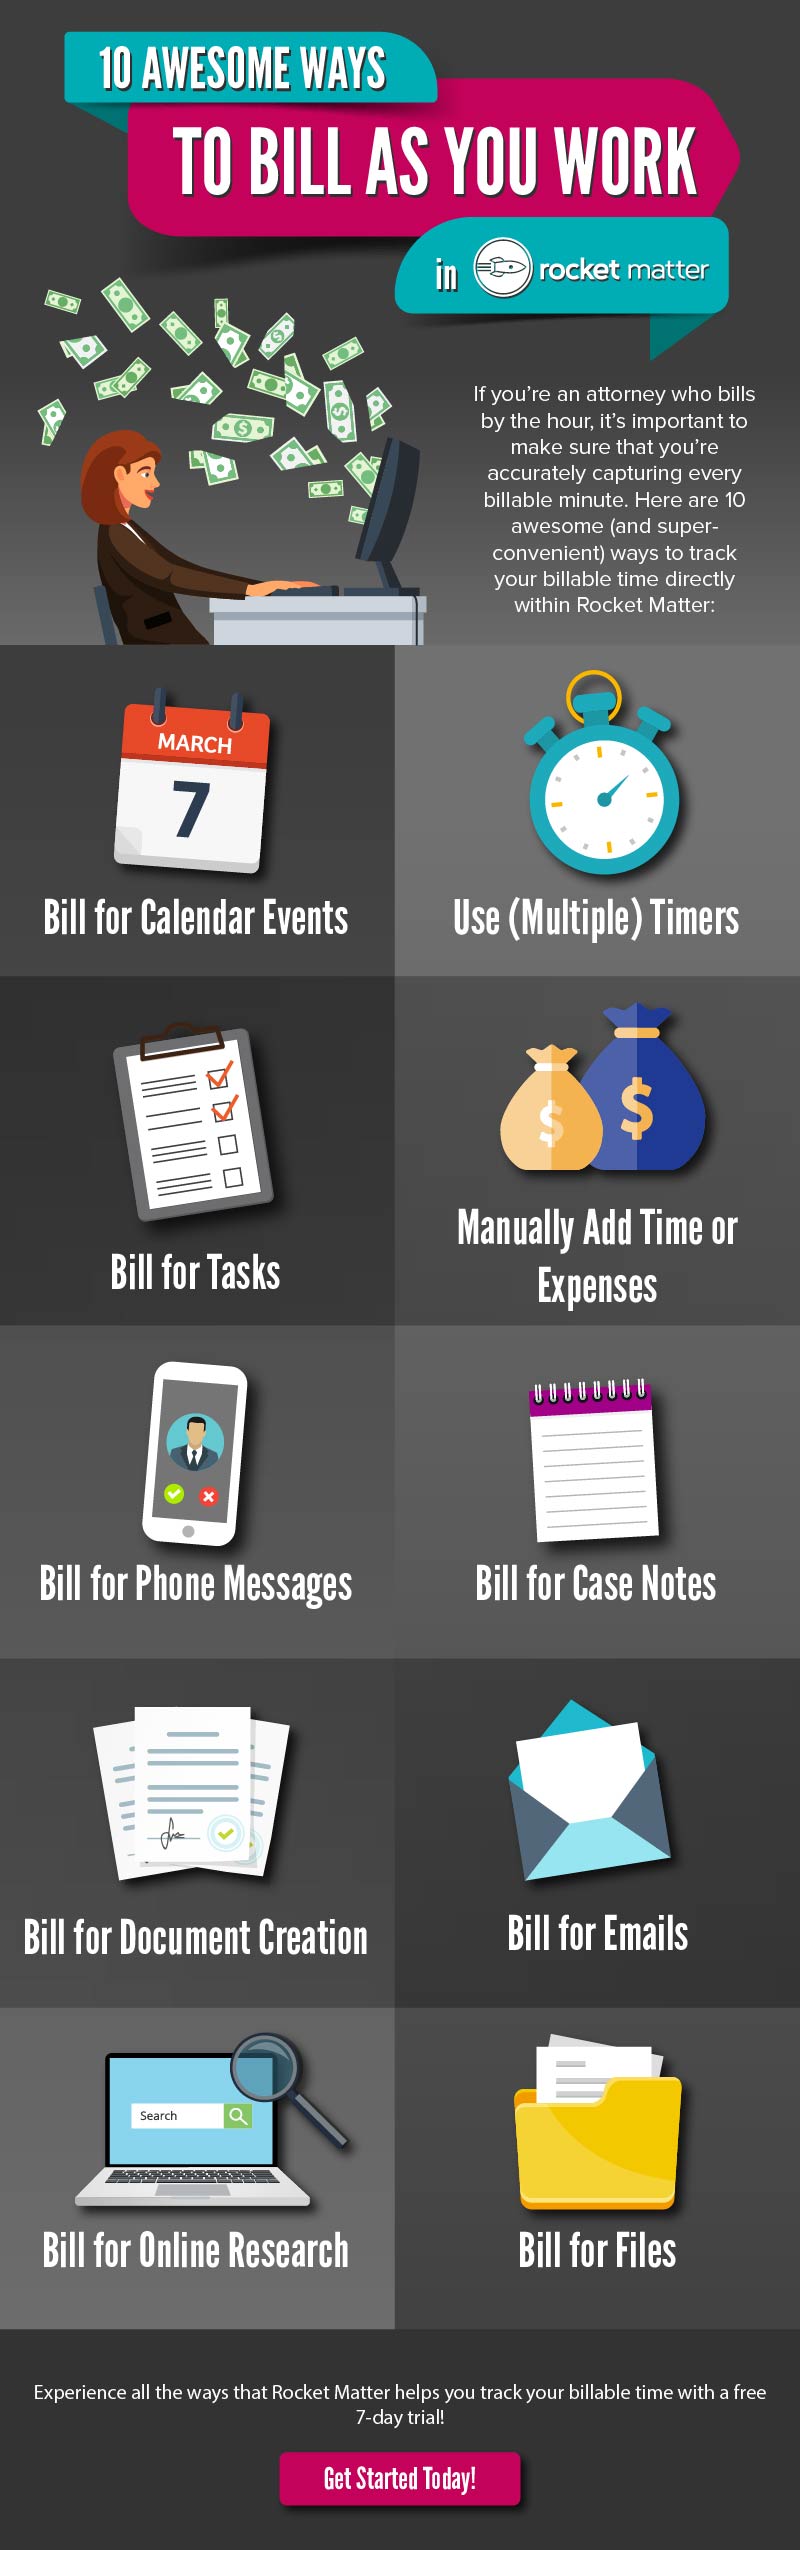 bill as you work infographic